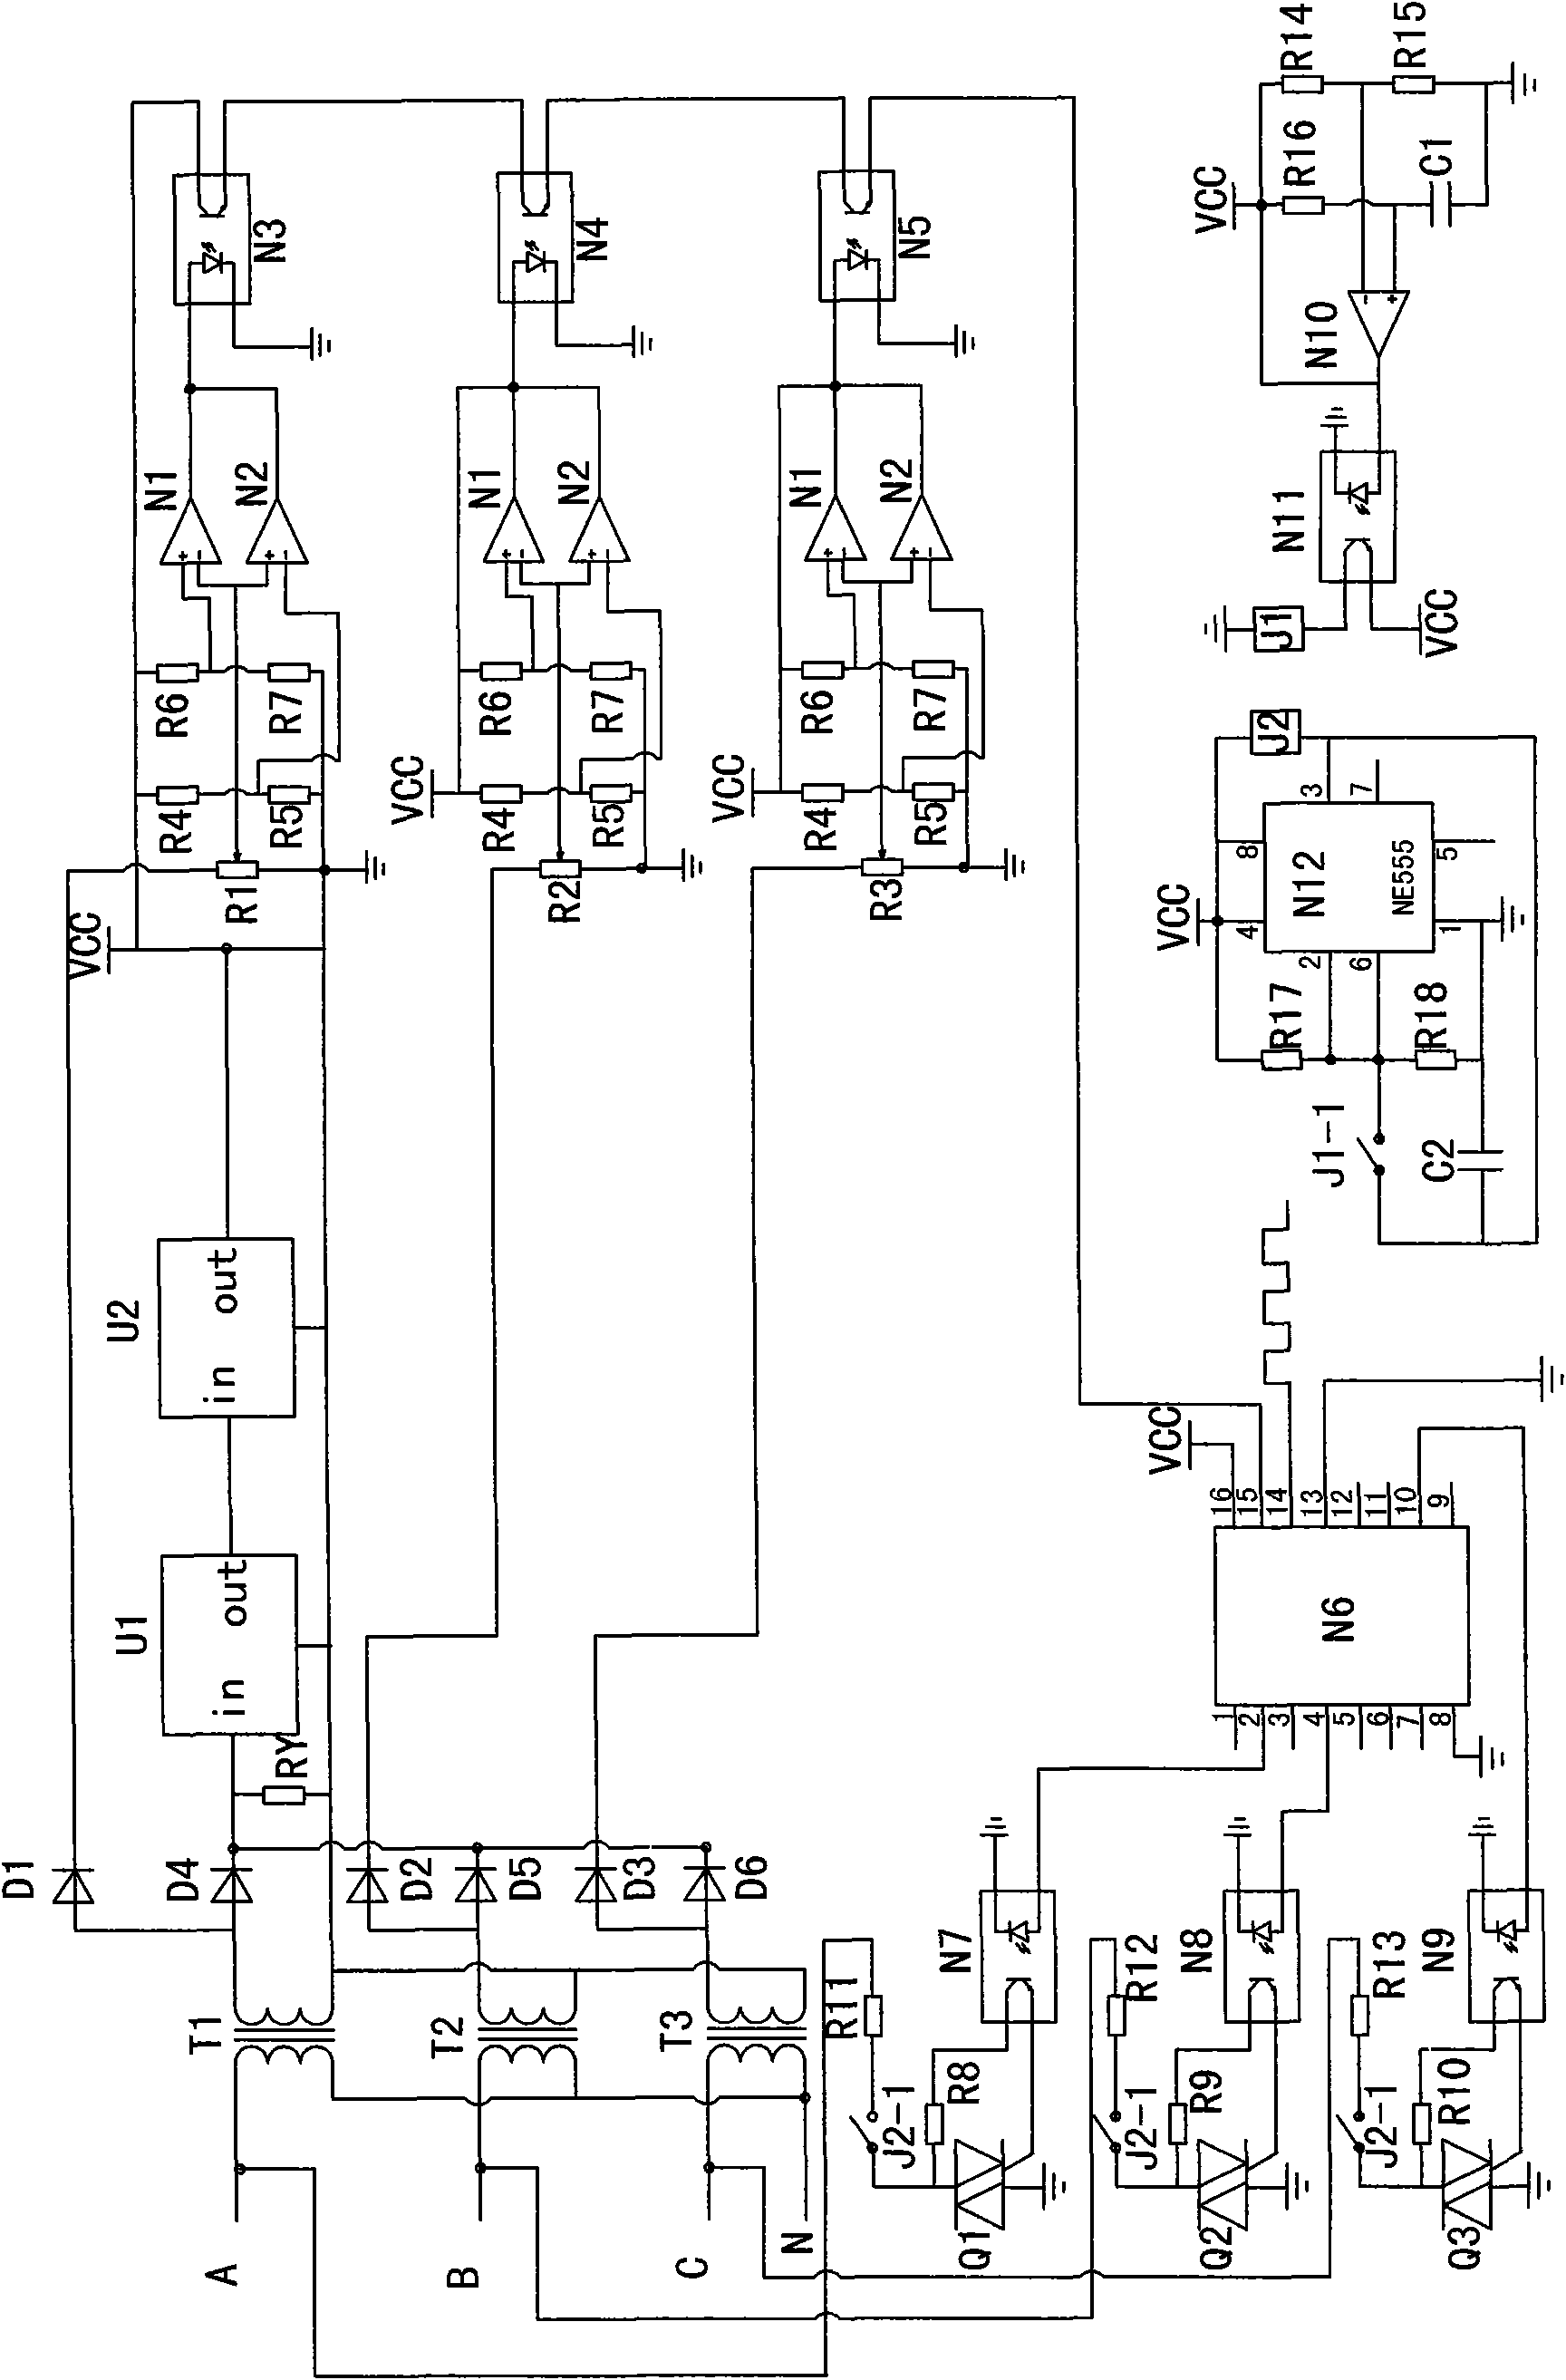 Protection device of power supply line disconnection fault